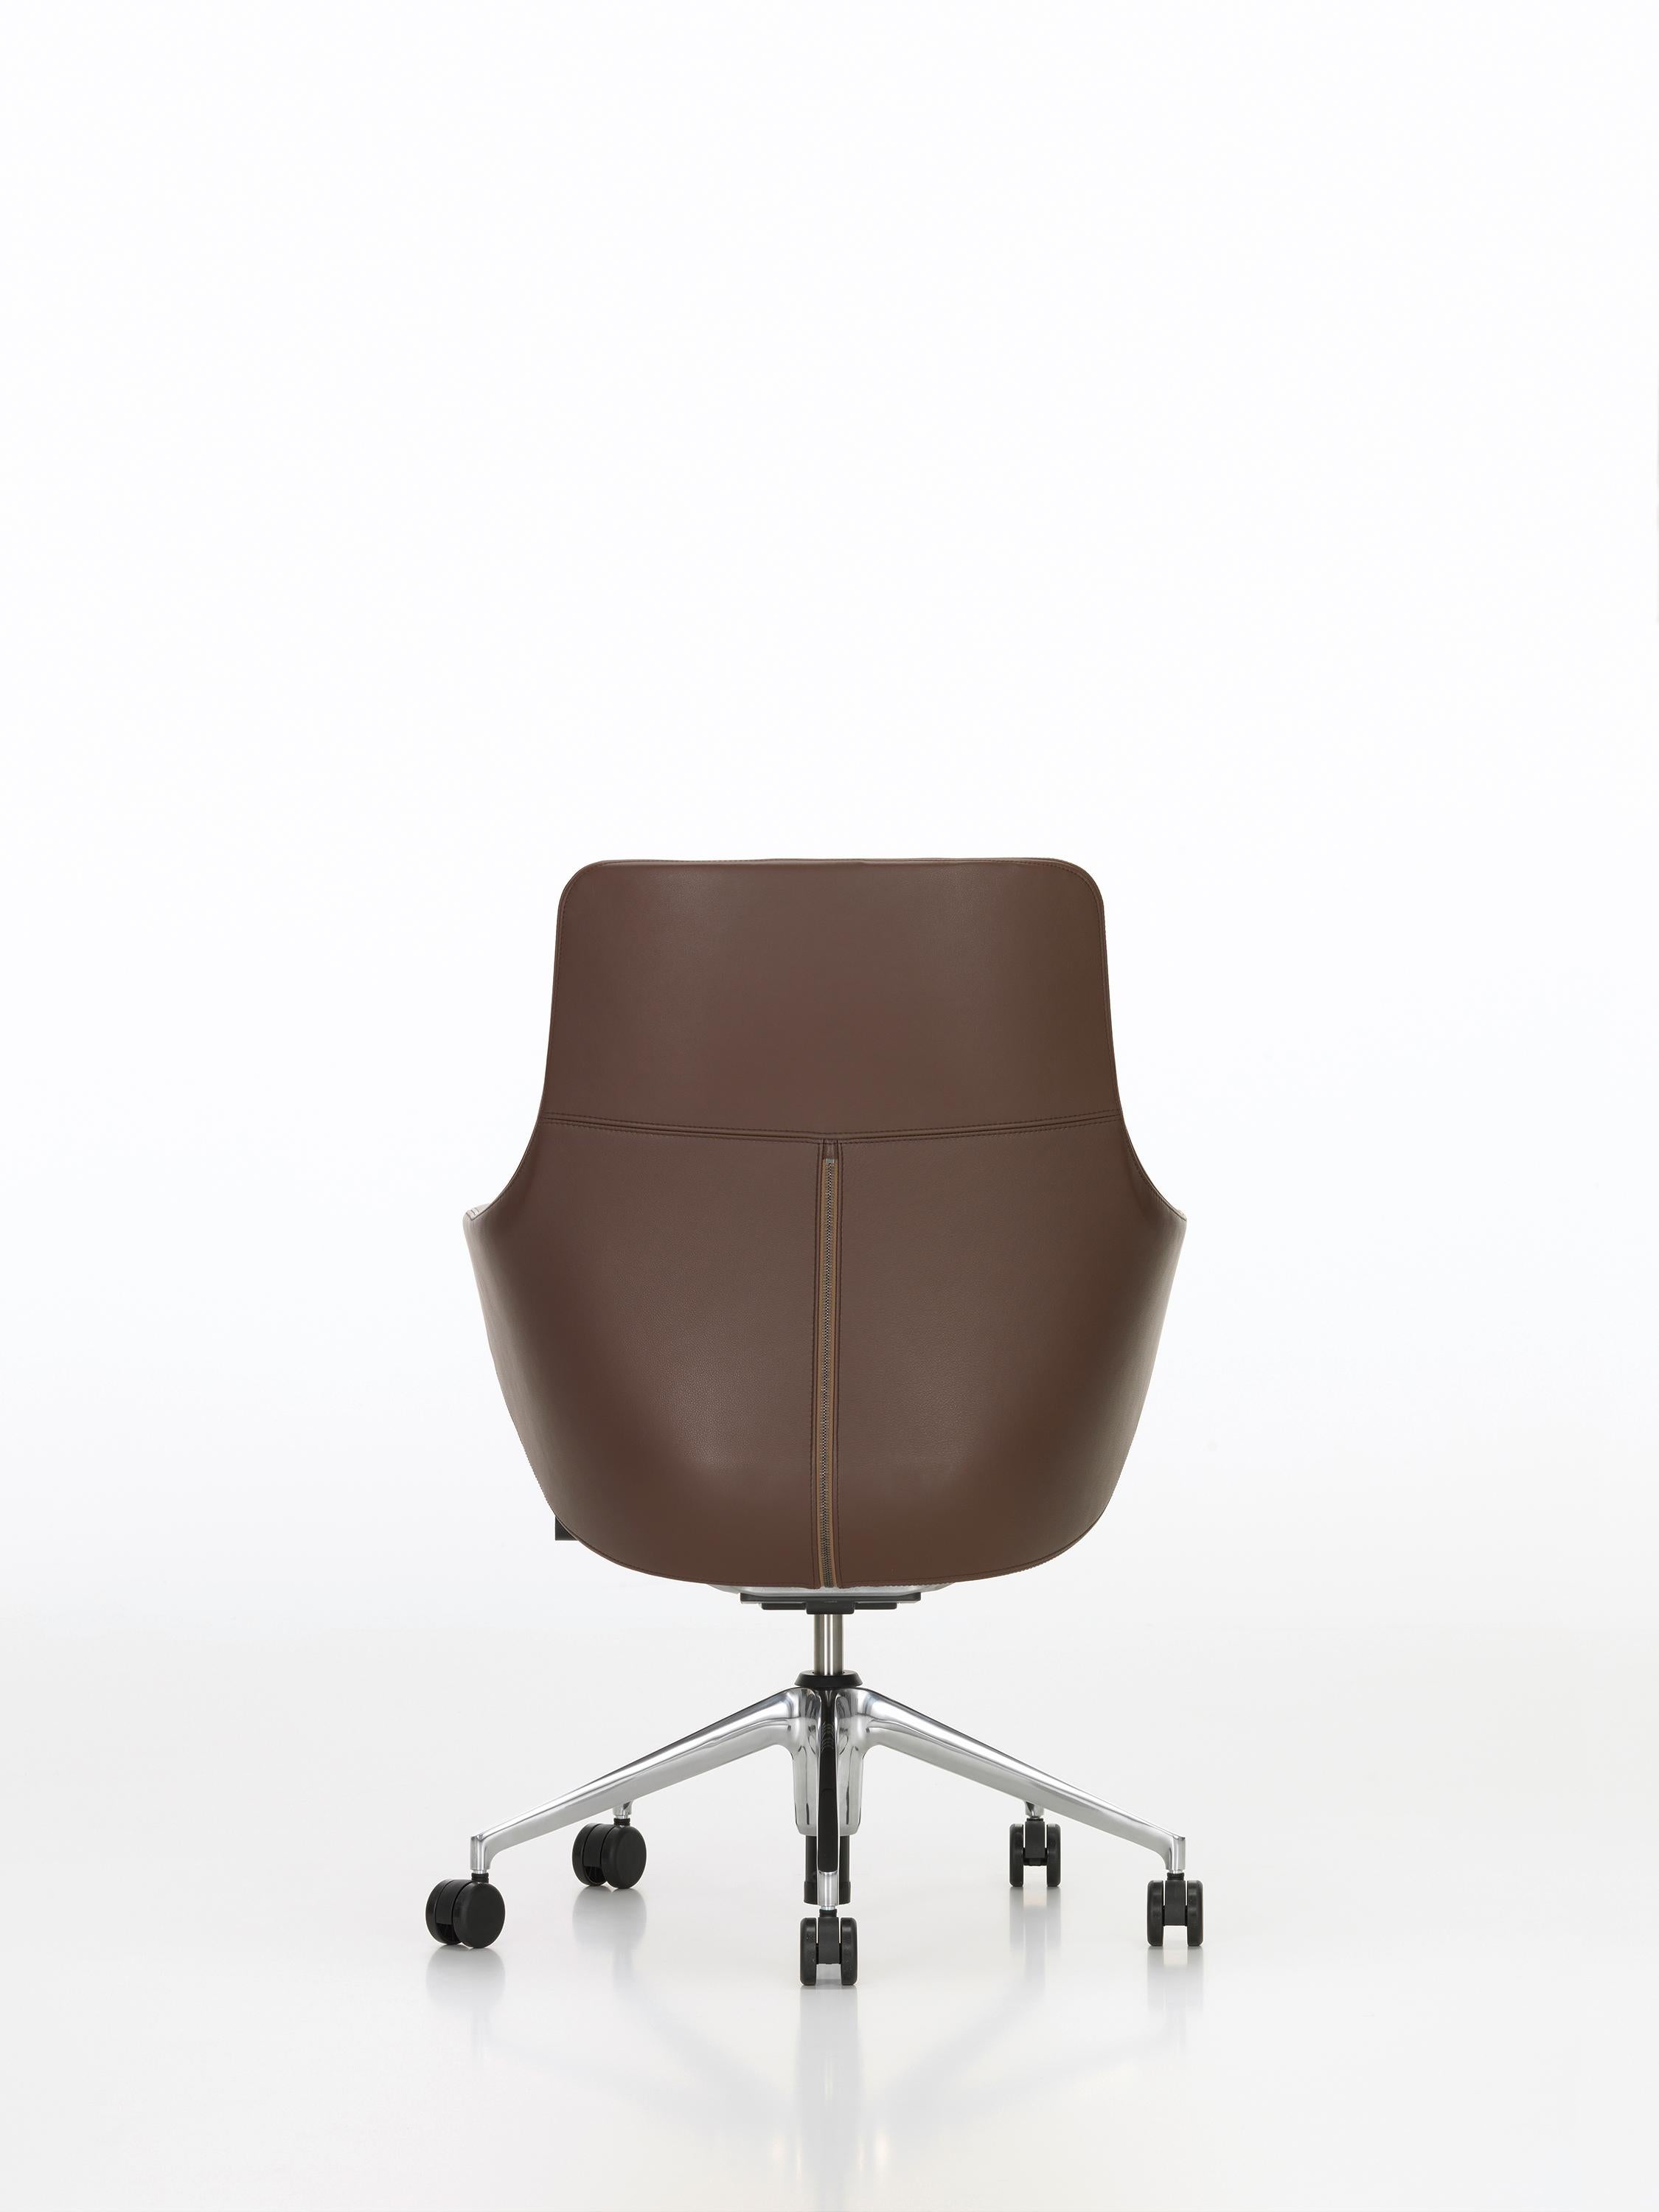 Modern Vitra Grand Executive Lowback Chair in Maroon Leather by Antonio Citterio For Sale